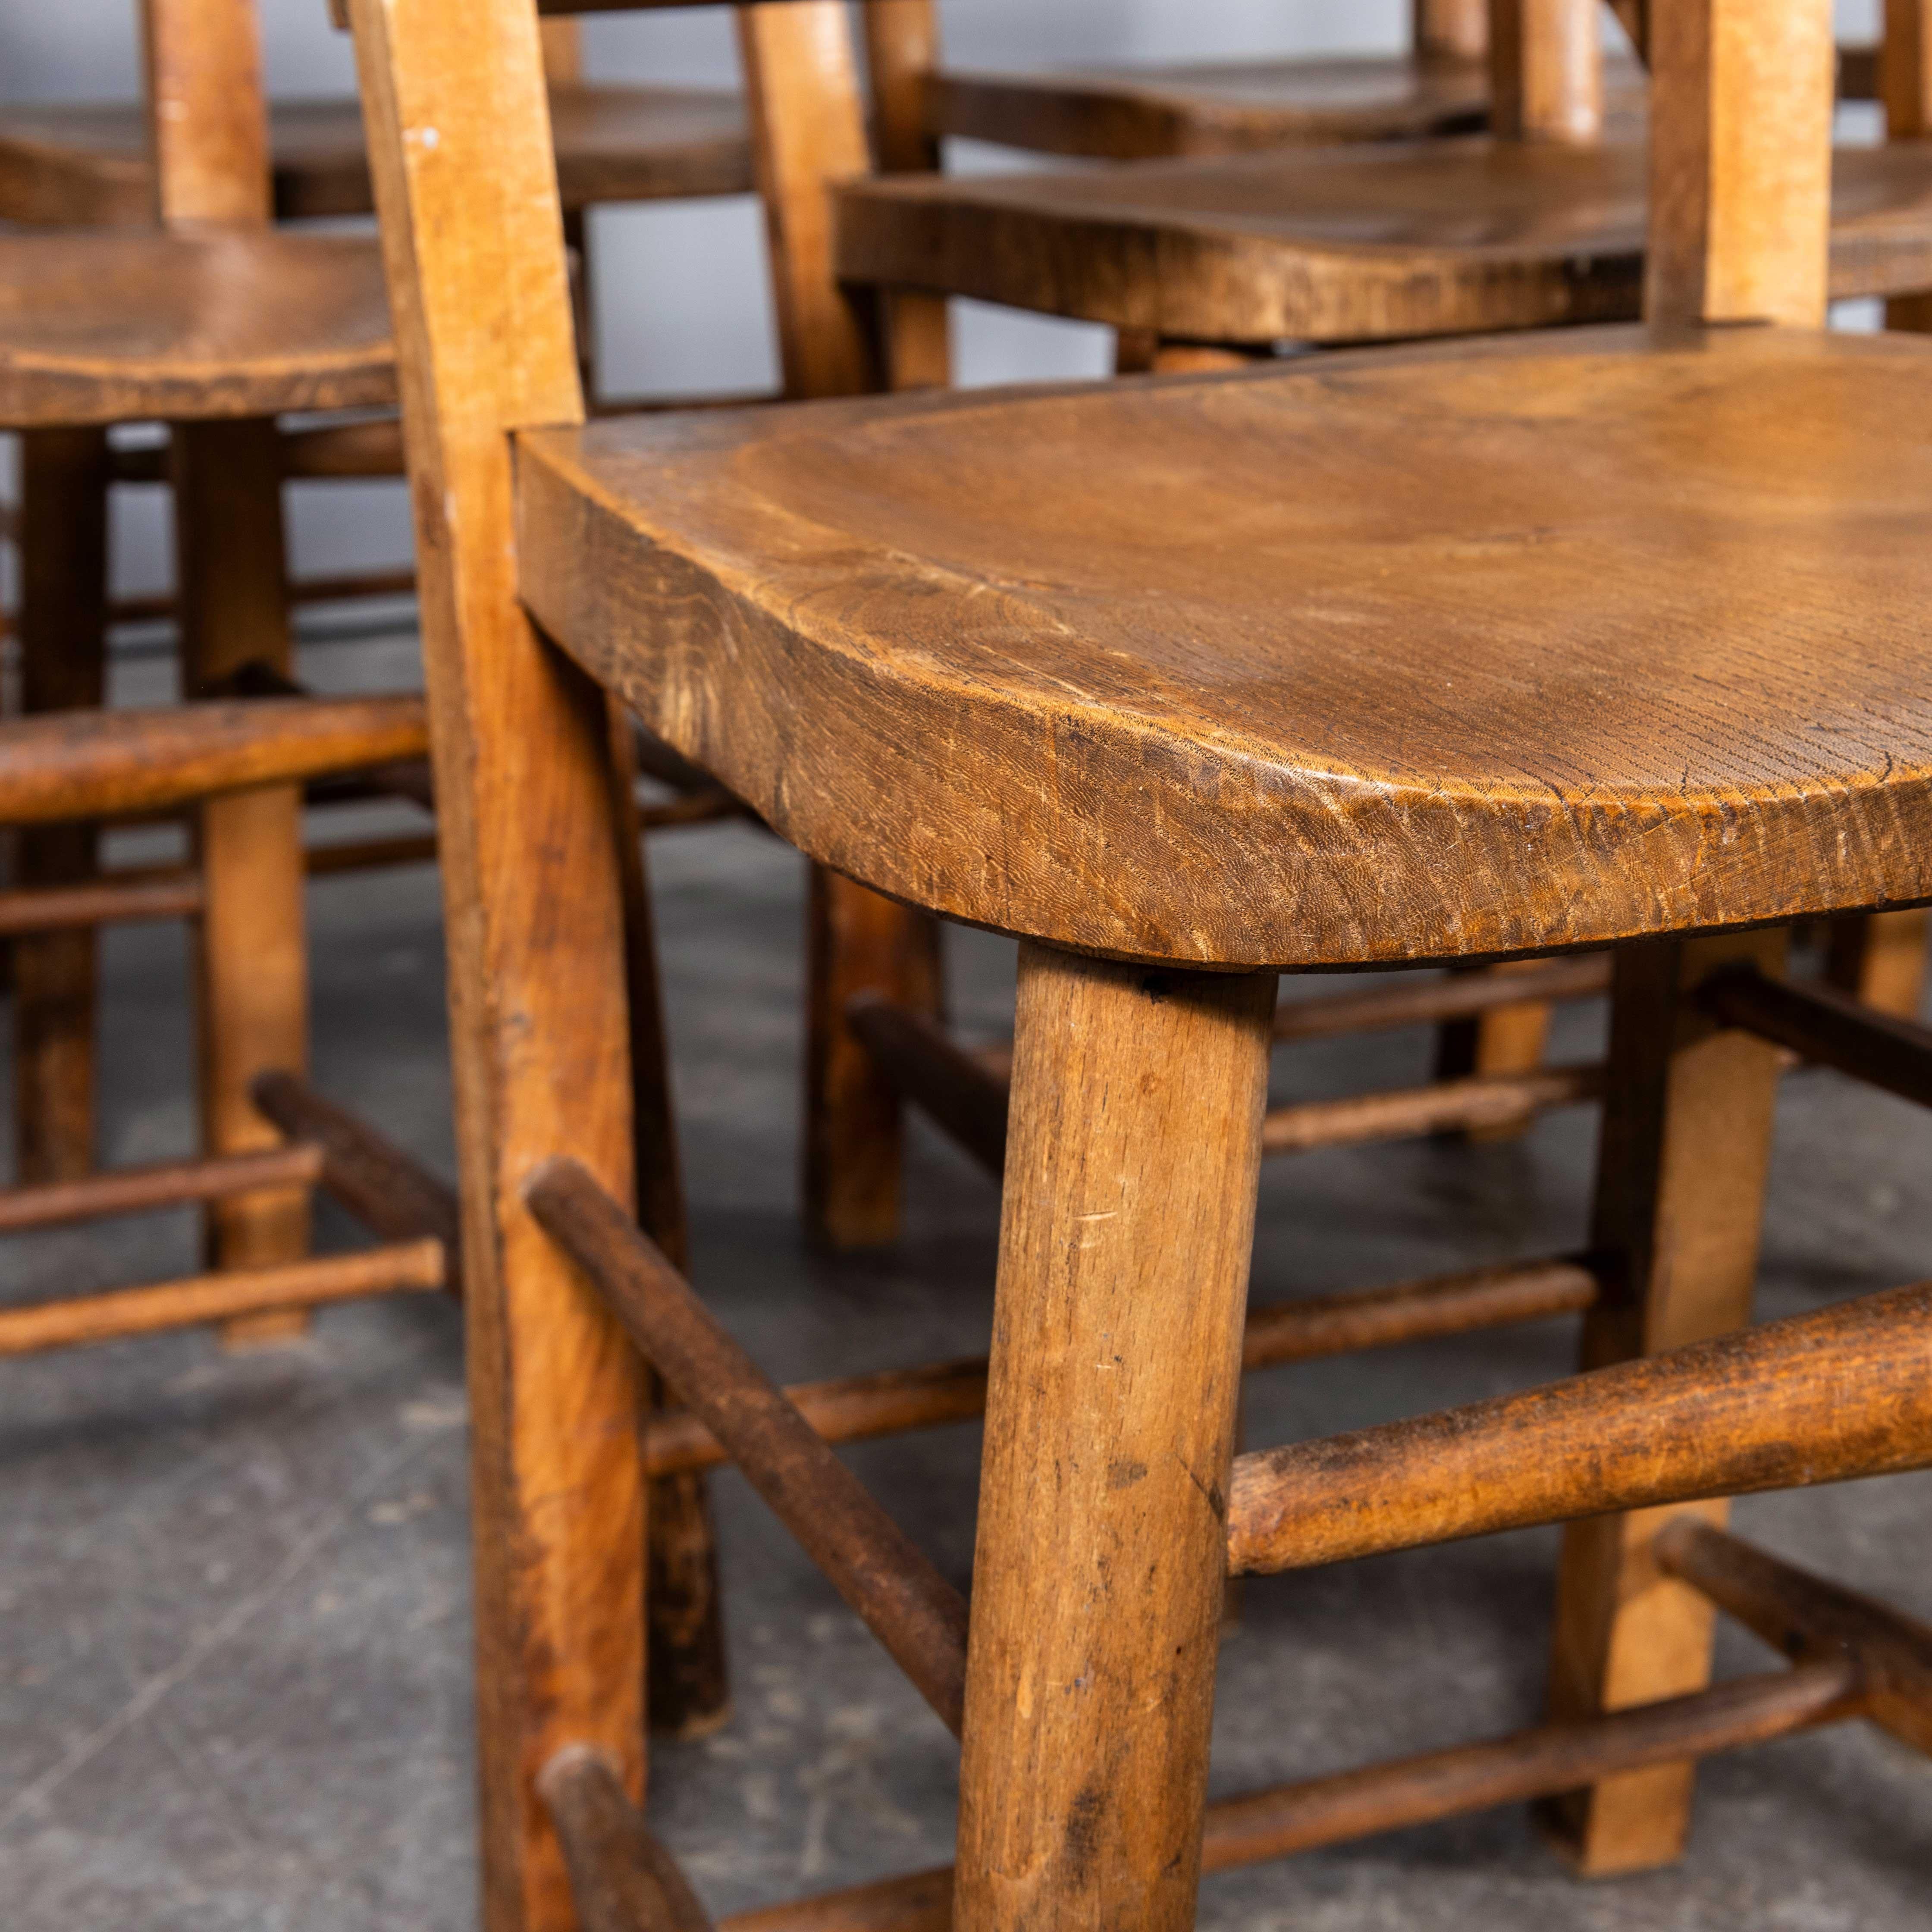 1940’s Solid Elm Church – Chapel Dining Chairs – Good Quantity Available
1940’s Solid Elm Church – Chapel Dining Chairs – Good Quantity Available. England has a wonderfully rich heritage for making chairs. At the height of production at the turn of